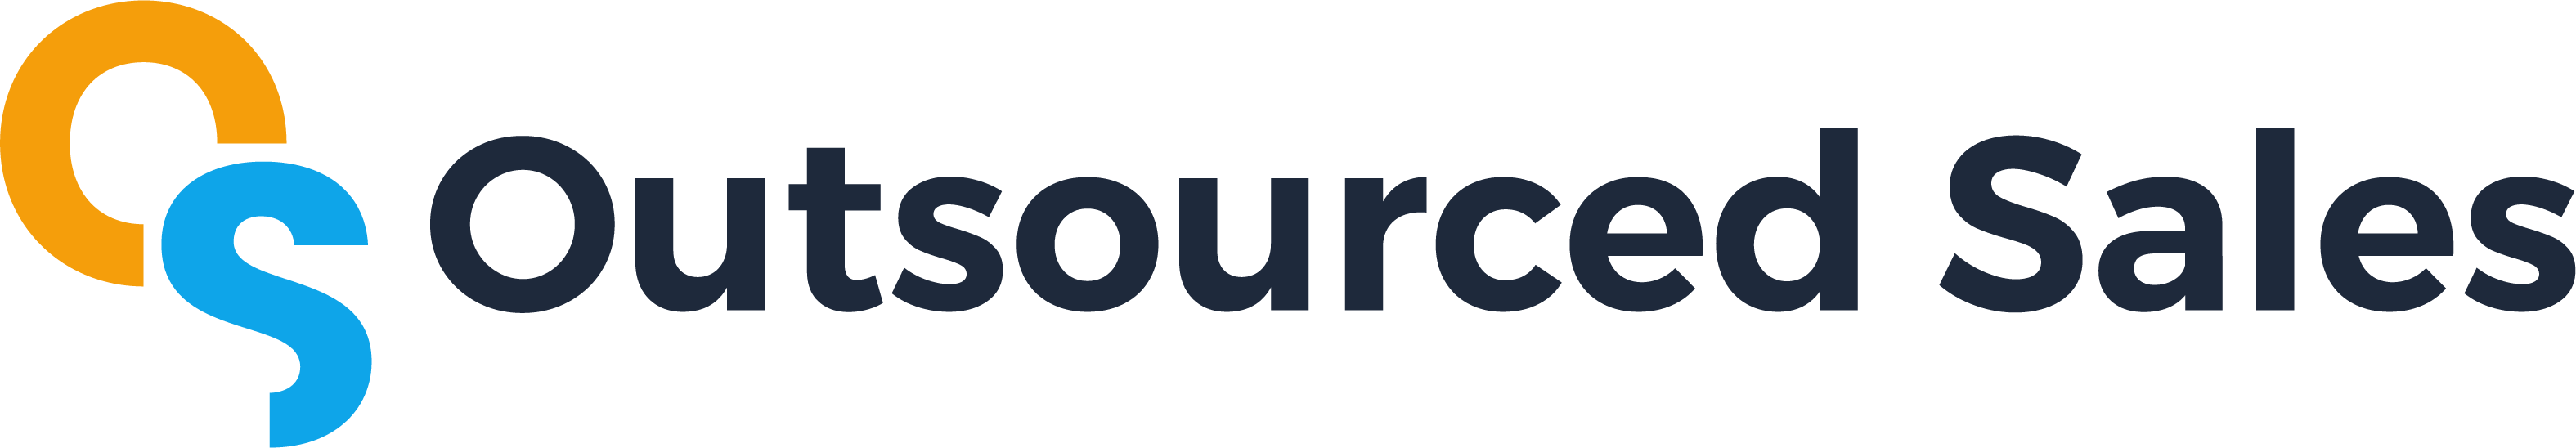 Outsourced Sales logo